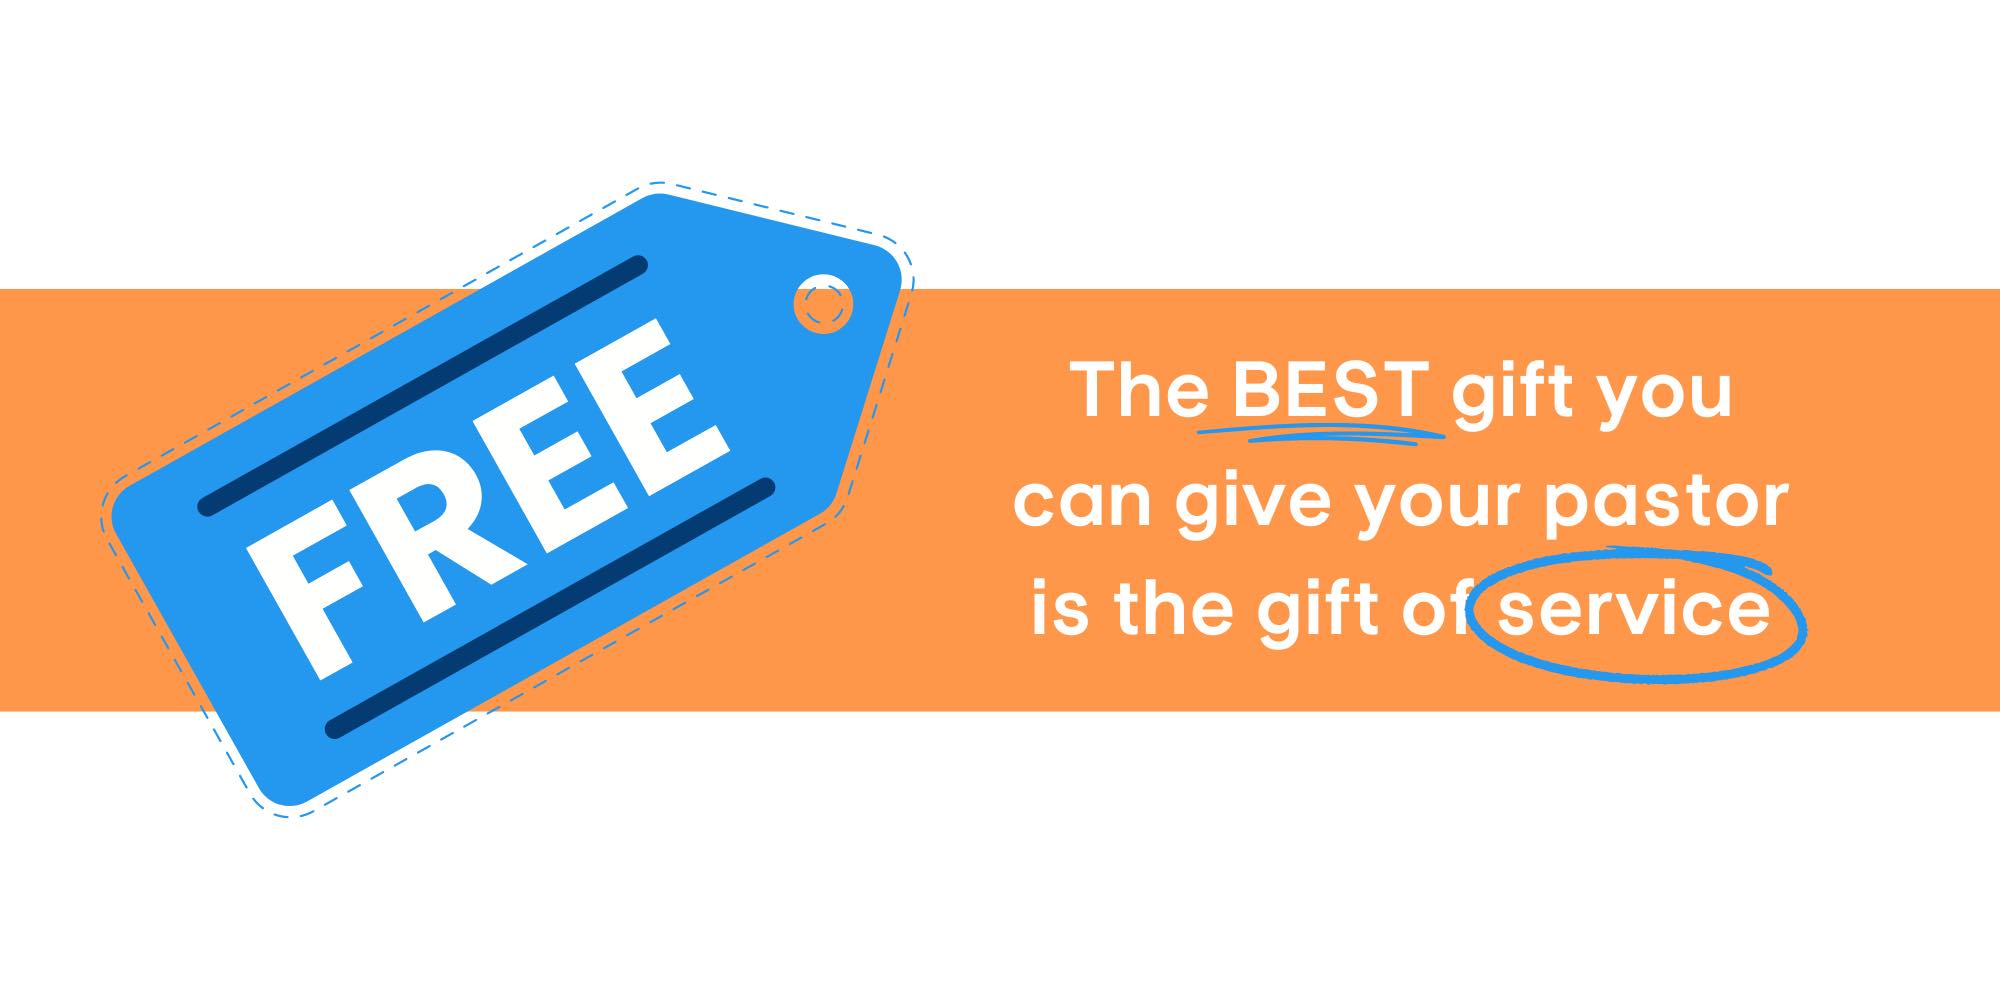 The best pastor gift ideas are the ones you give for free